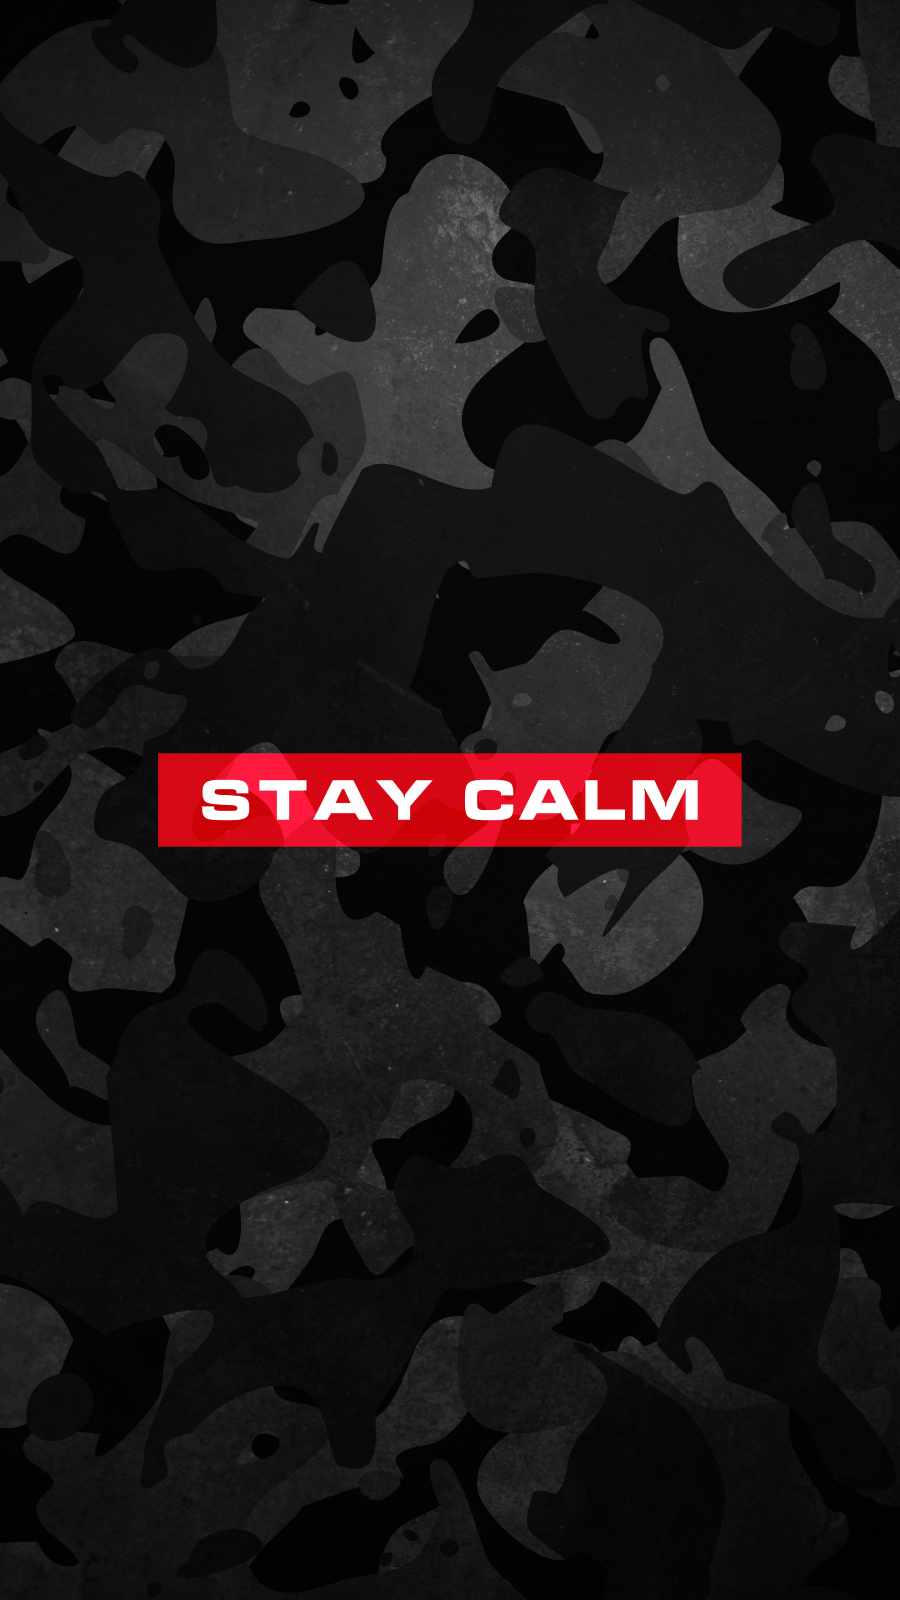 Stay Calm IPhone Wallpaper - IPhone Wallpapers : iPhone Wallpapers